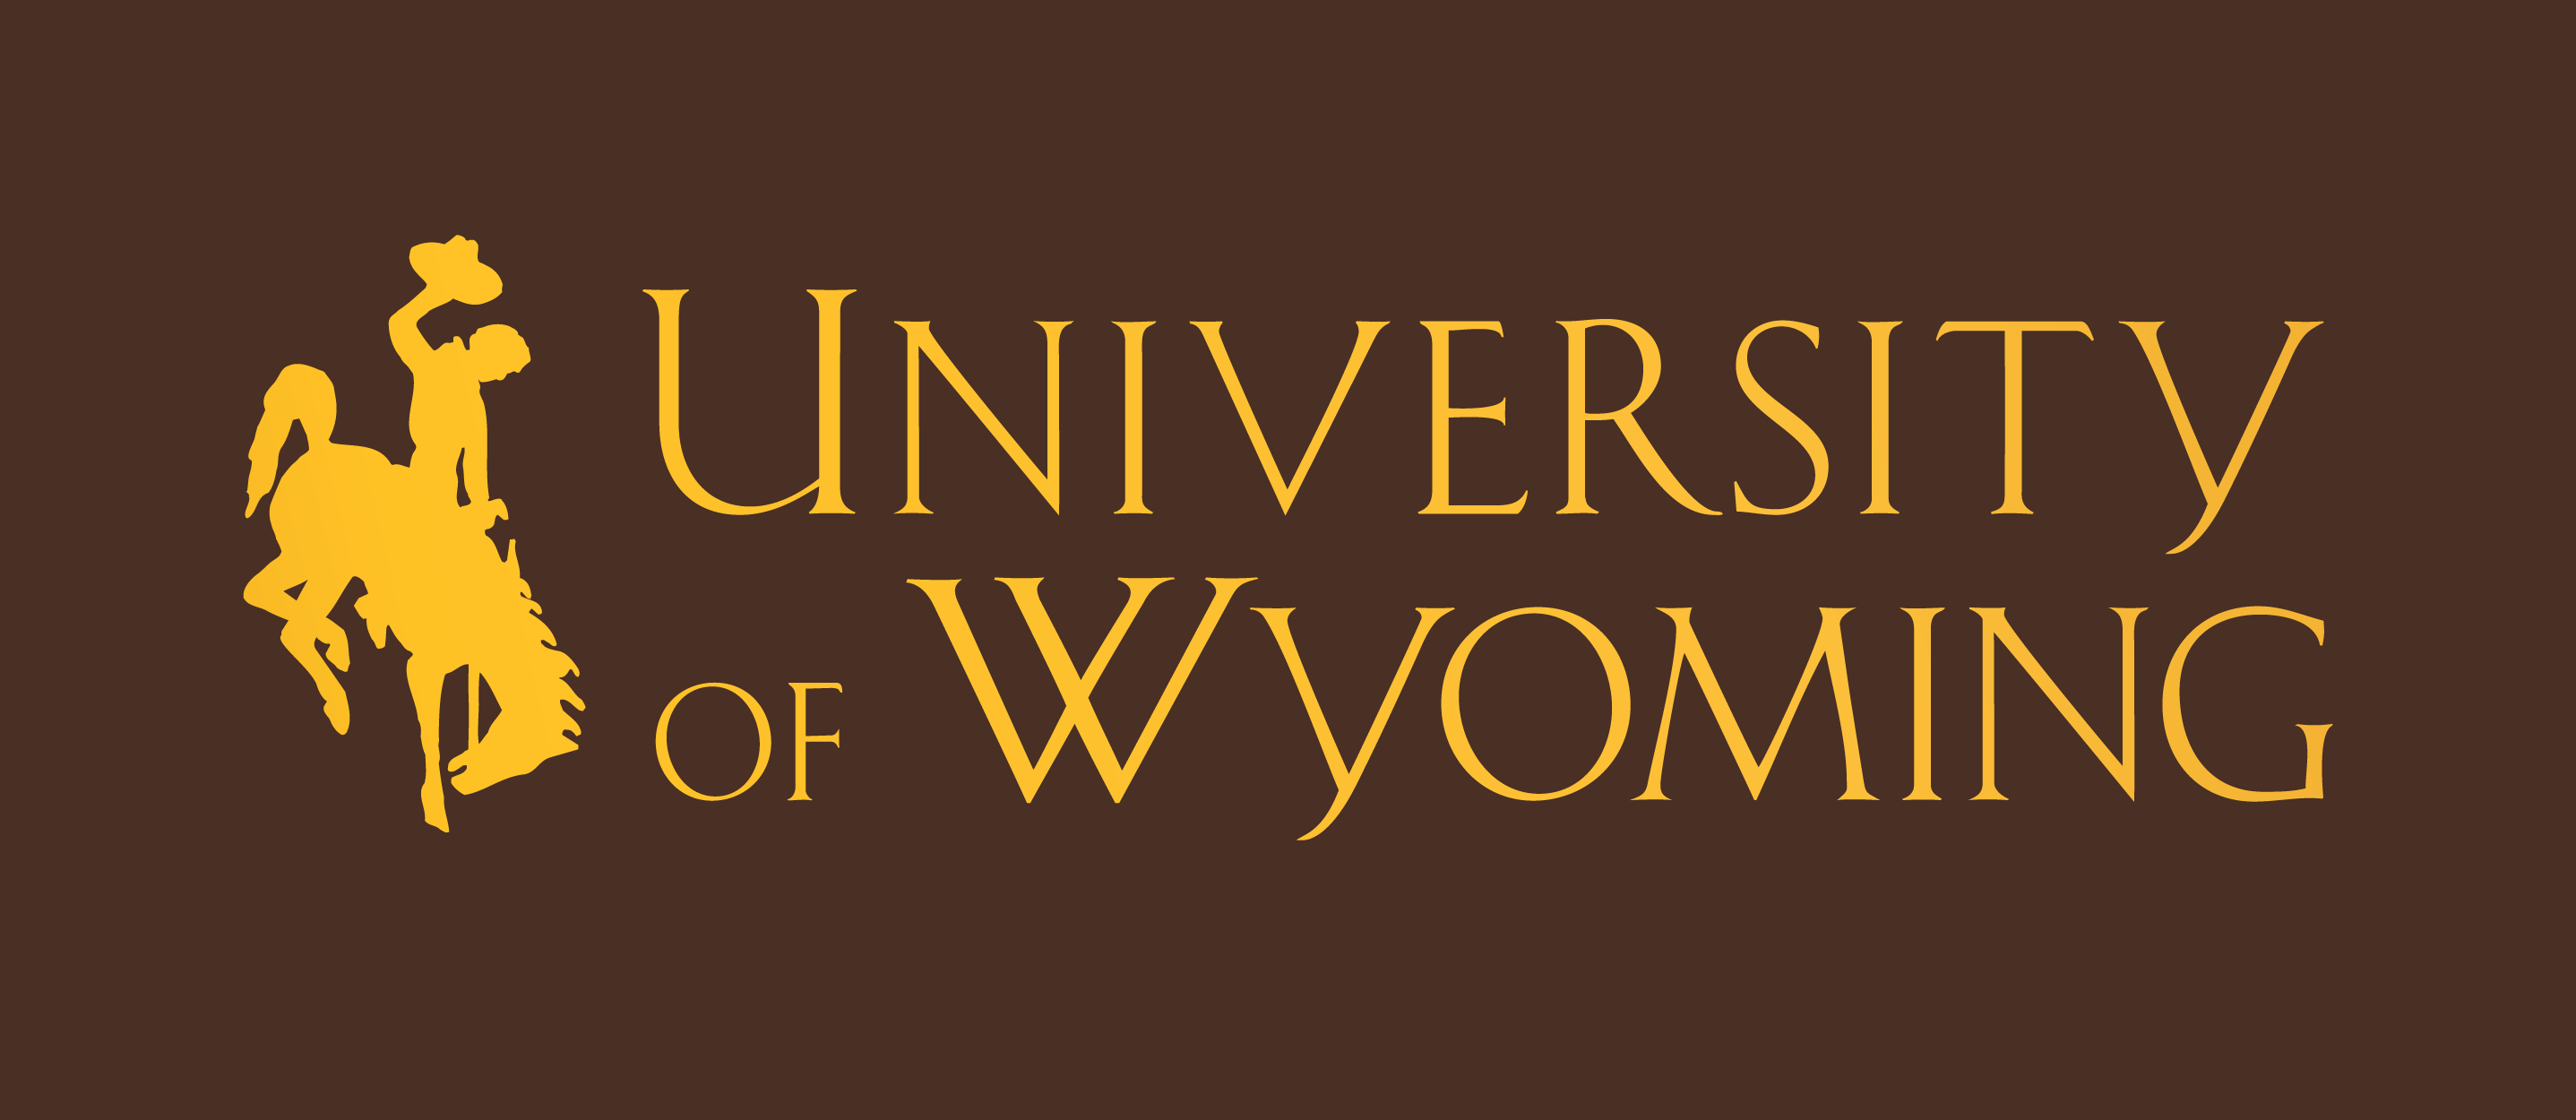 University of Wyoming logo set on an image of campus in the fall